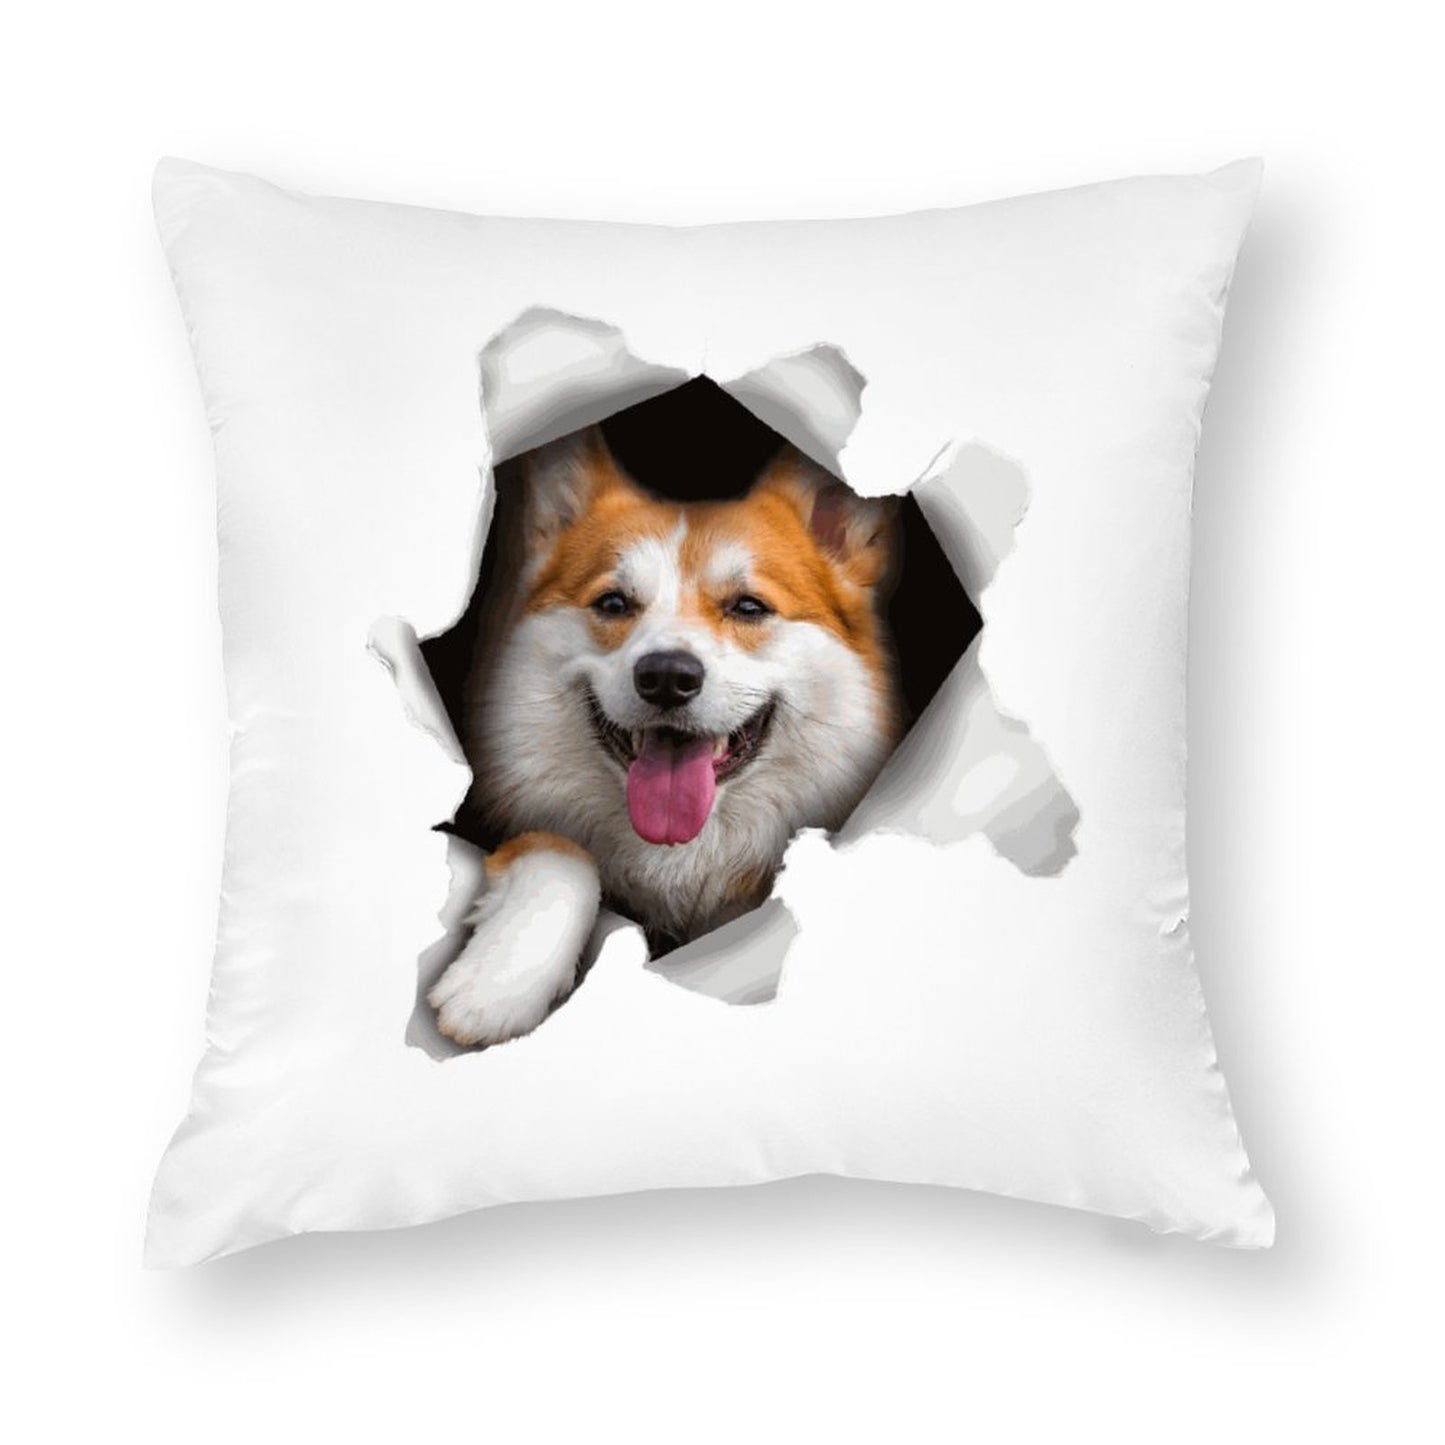 Online DIY Polyester Pillow Case Set of 2 Paper Hole Dog Only Pillowcase